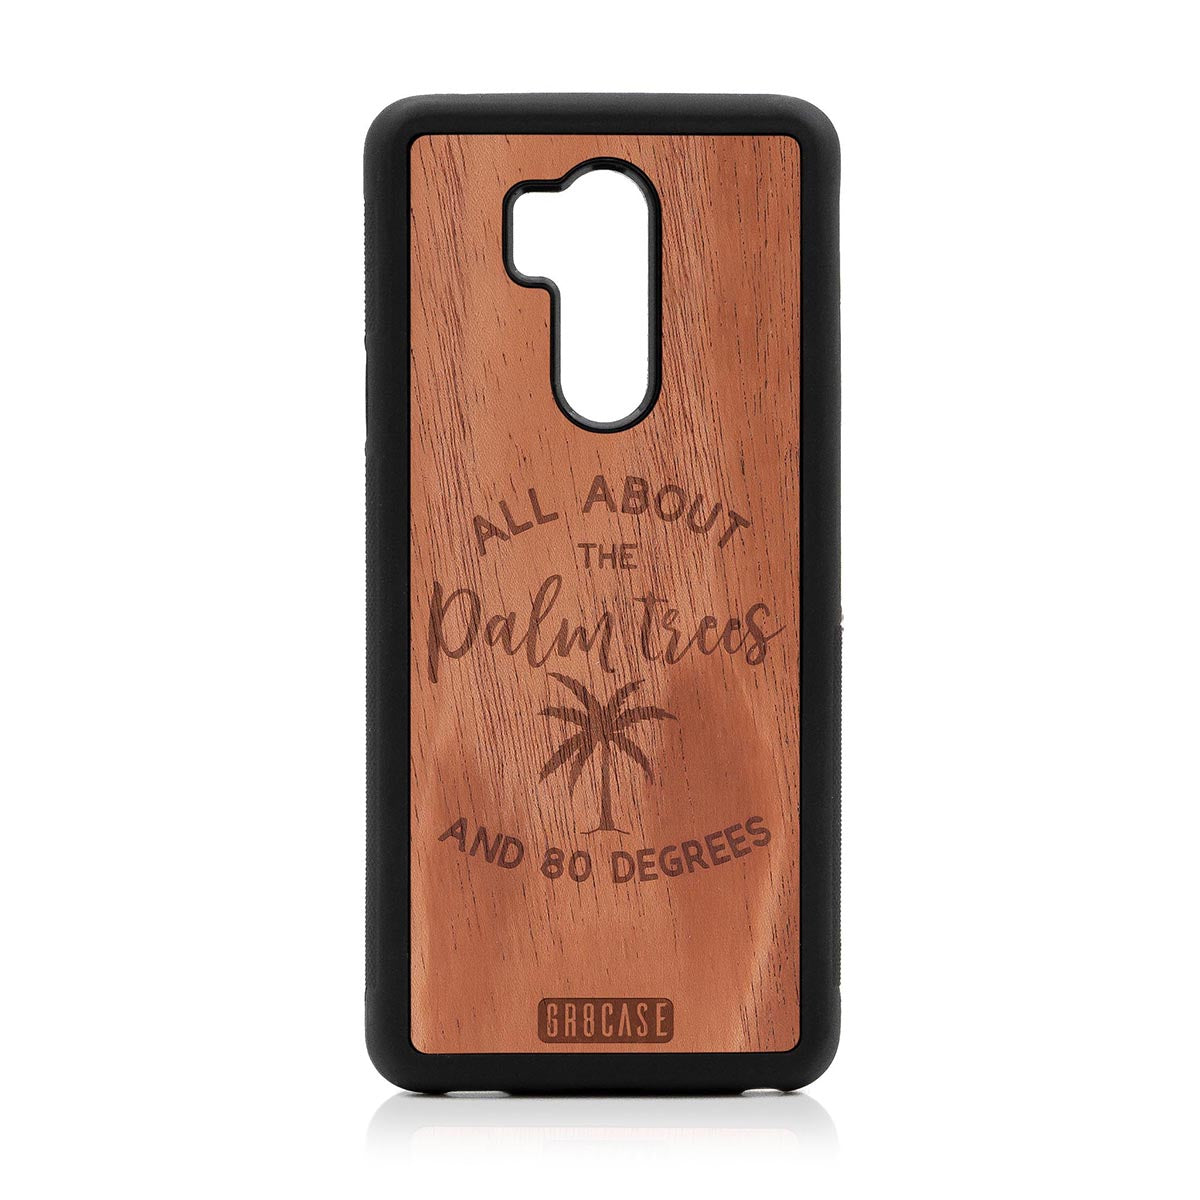 All About The Palm Trees and 80 Degrees Design Wood Case For LG G7 ThinQ by GR8CASE